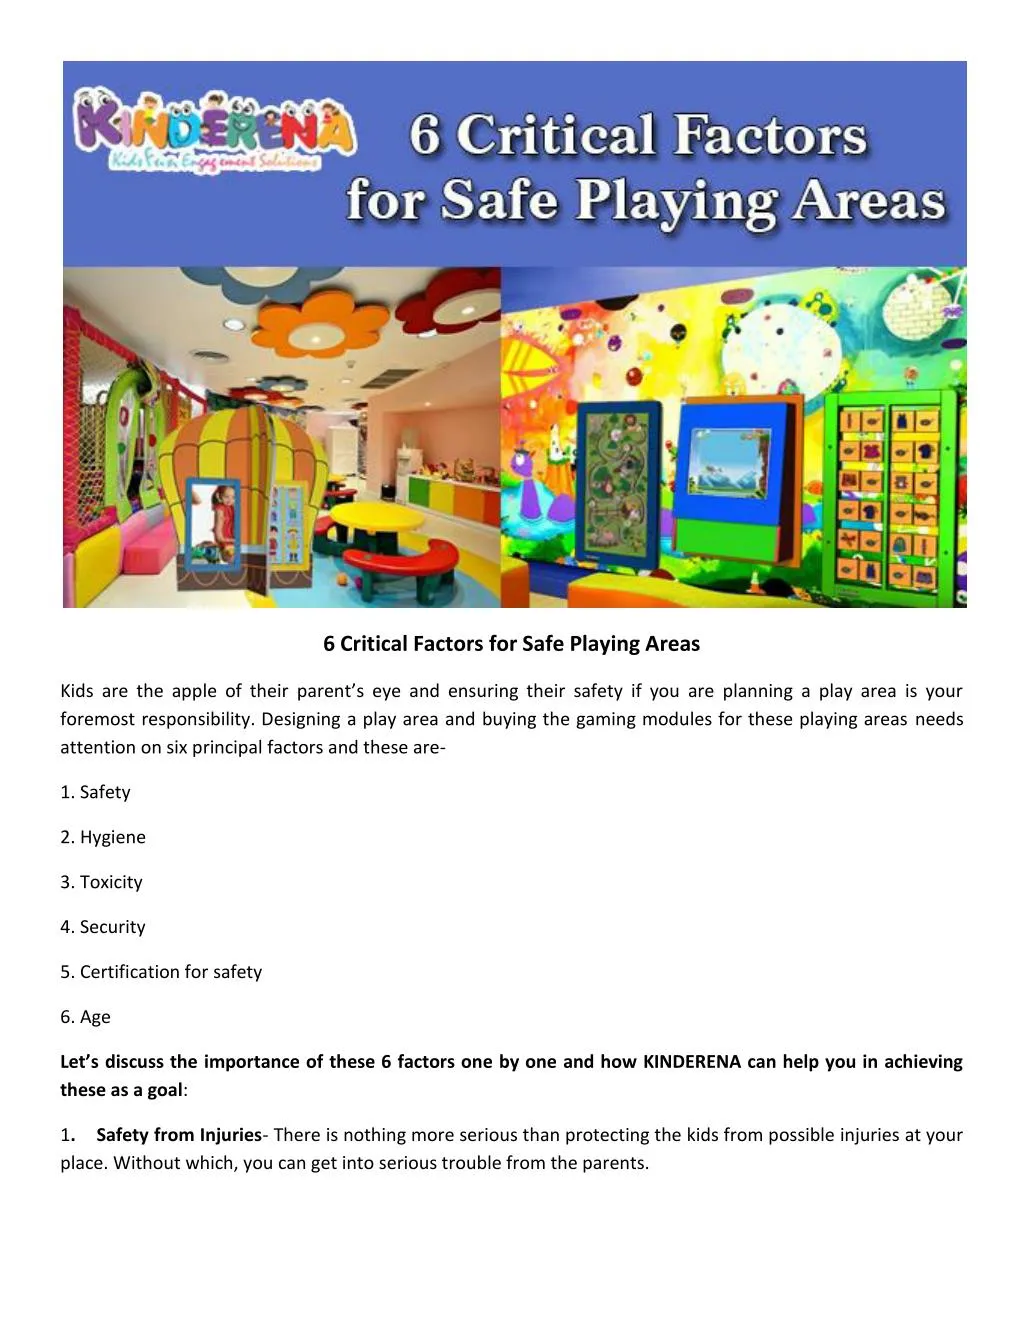 6 critical factors for safe playing areas